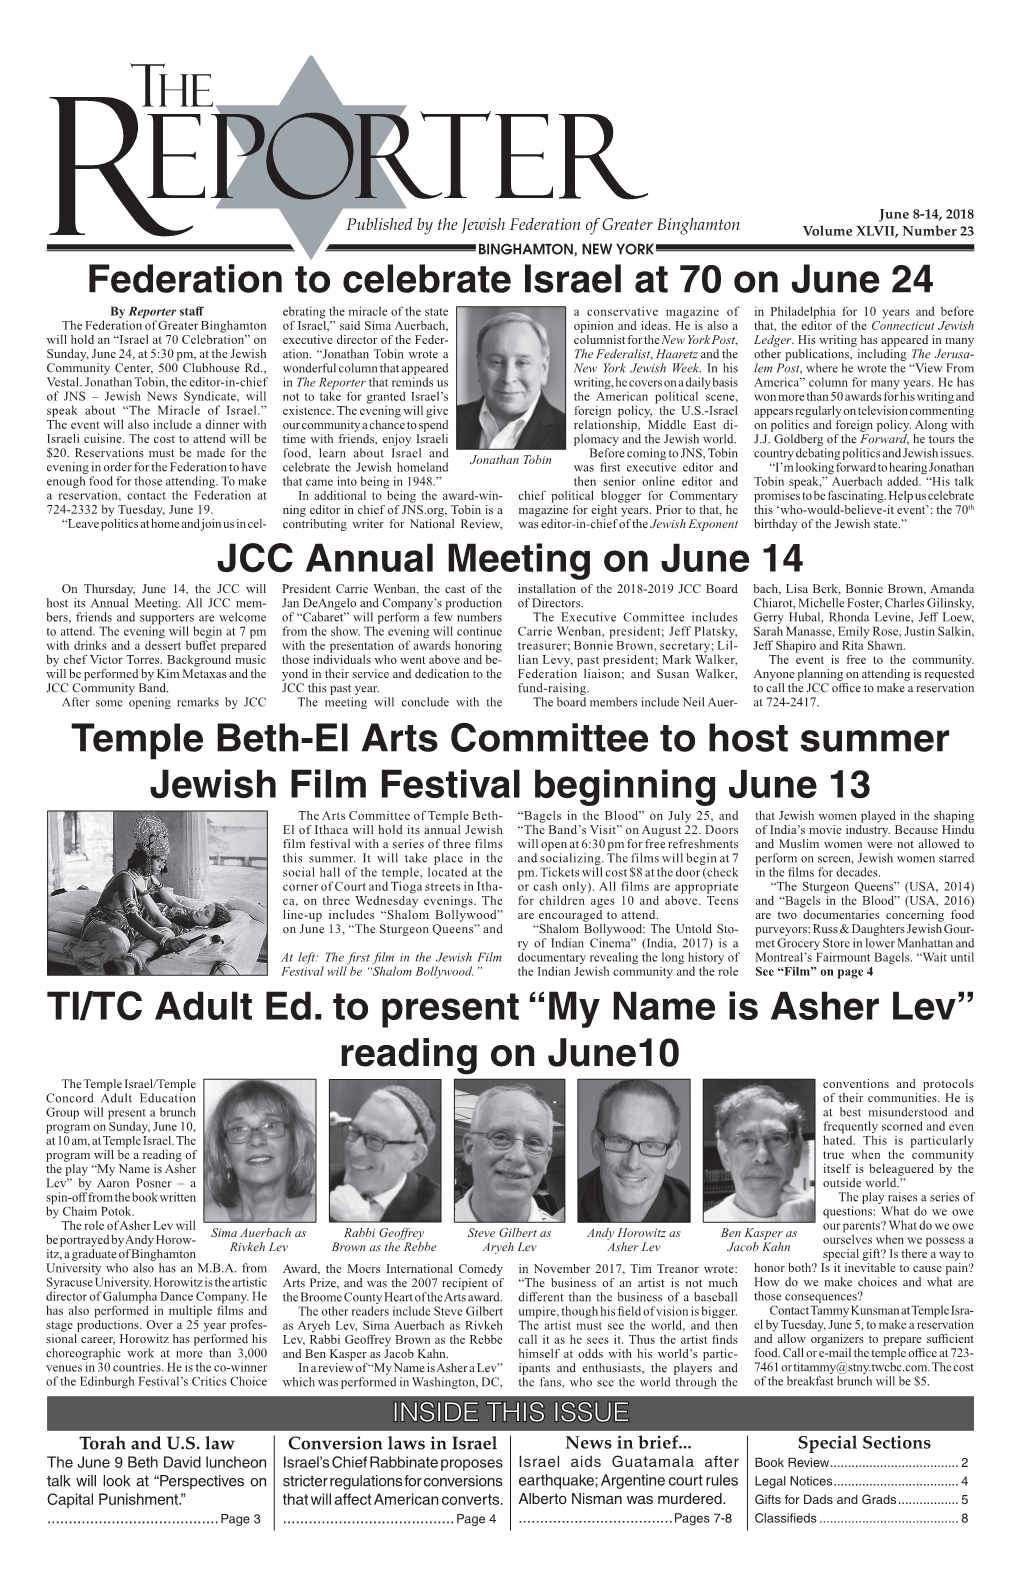 My Name Is Asher Lev” Reading on June10 the Temple Israel/Temple Conventions and Protocols Concord Adult Education of Their Communities